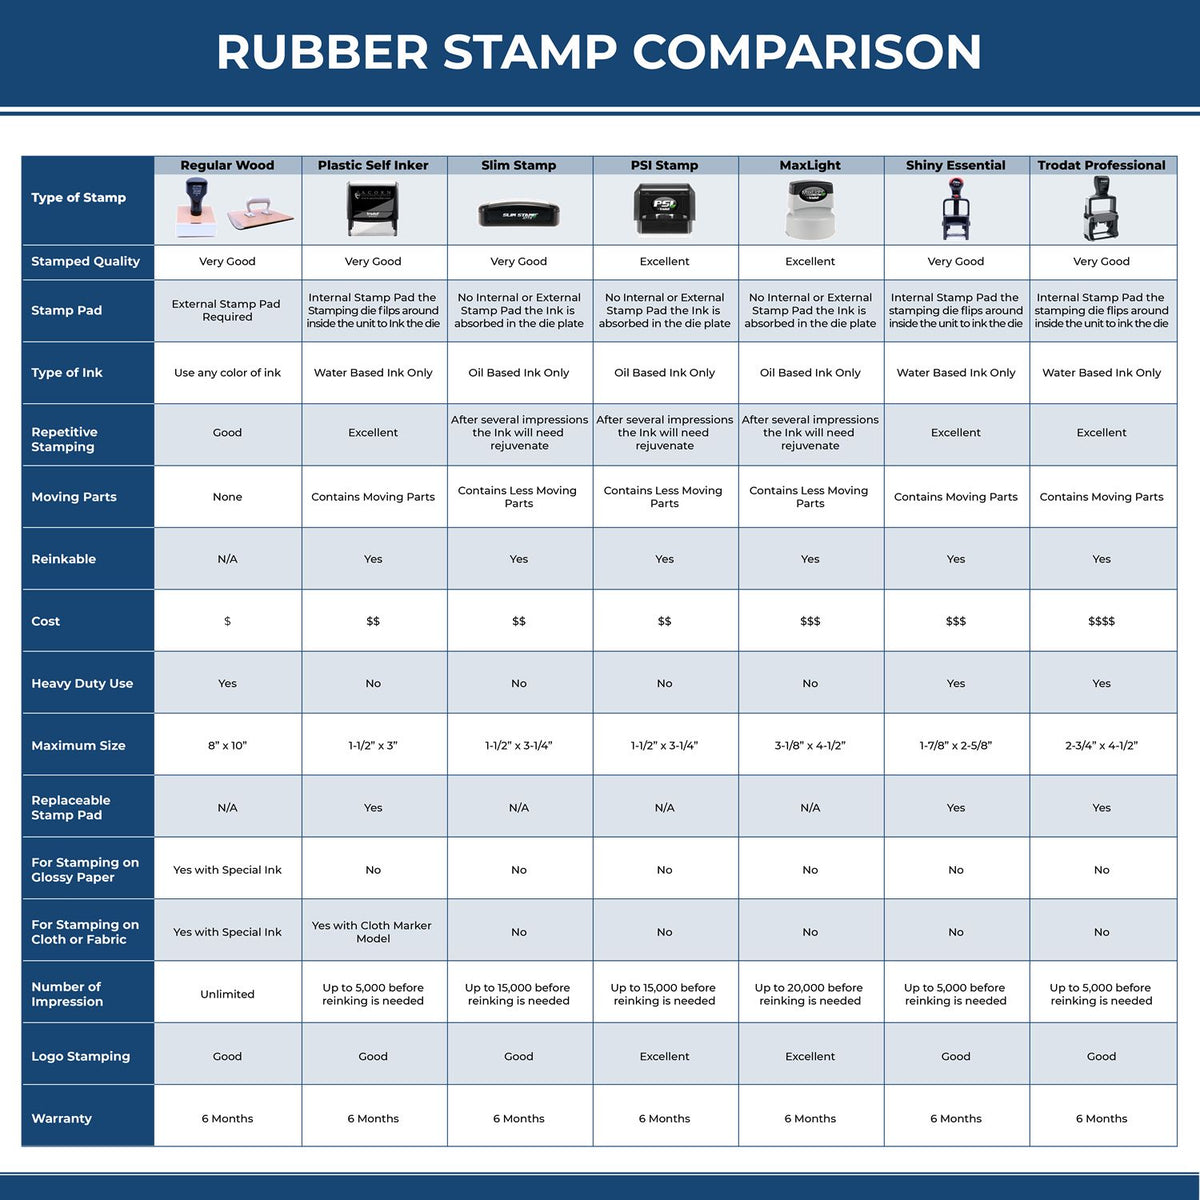 A comparison chart for the different types of mount models available for the Premium MaxLight Pre-Inked Utah Engineering Stamp.